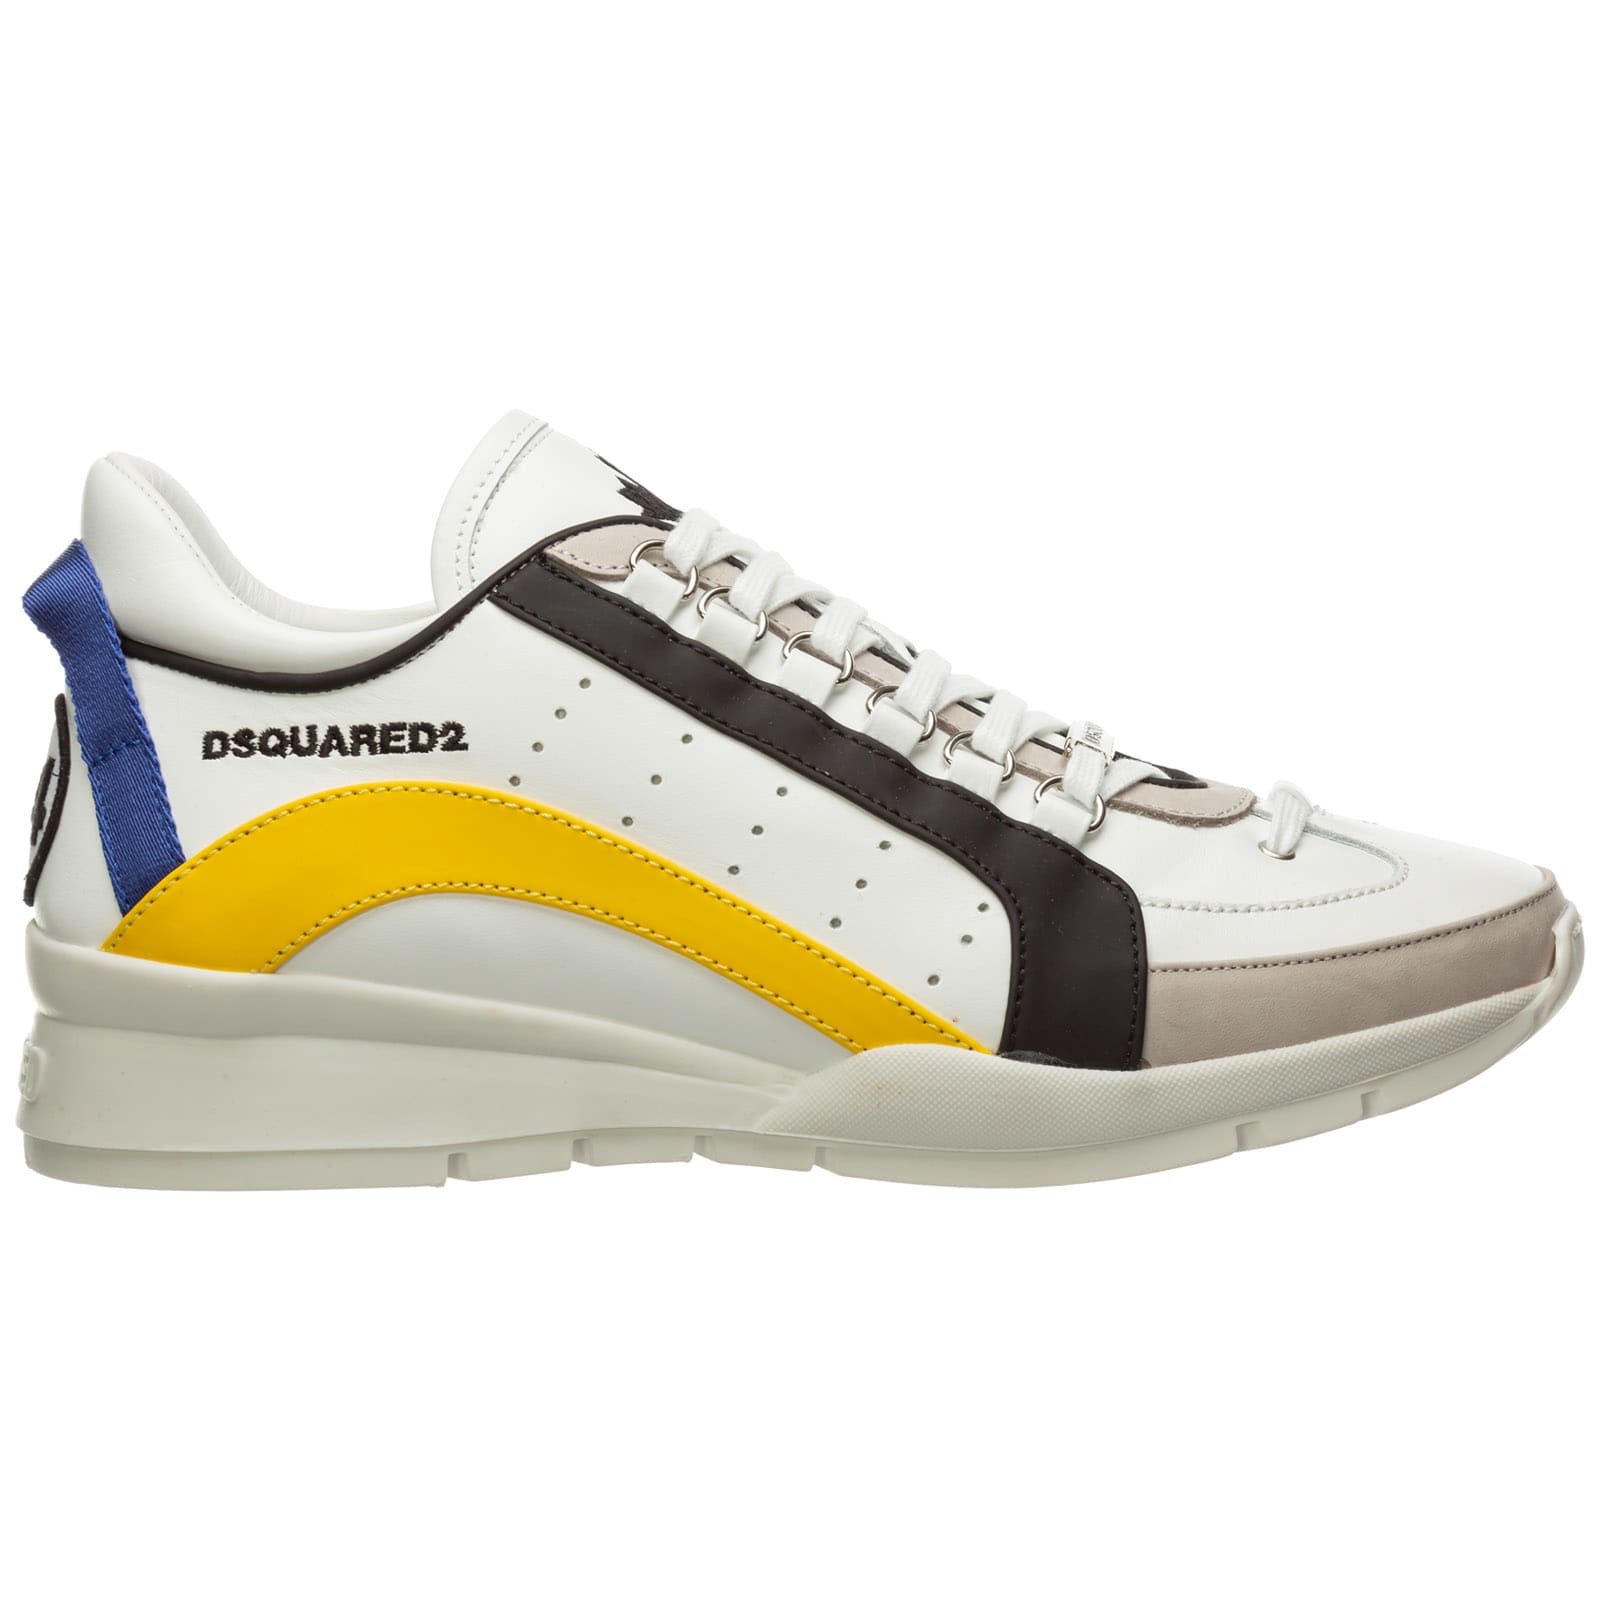 DSQUARED2 551 SNEAKERS,11256052